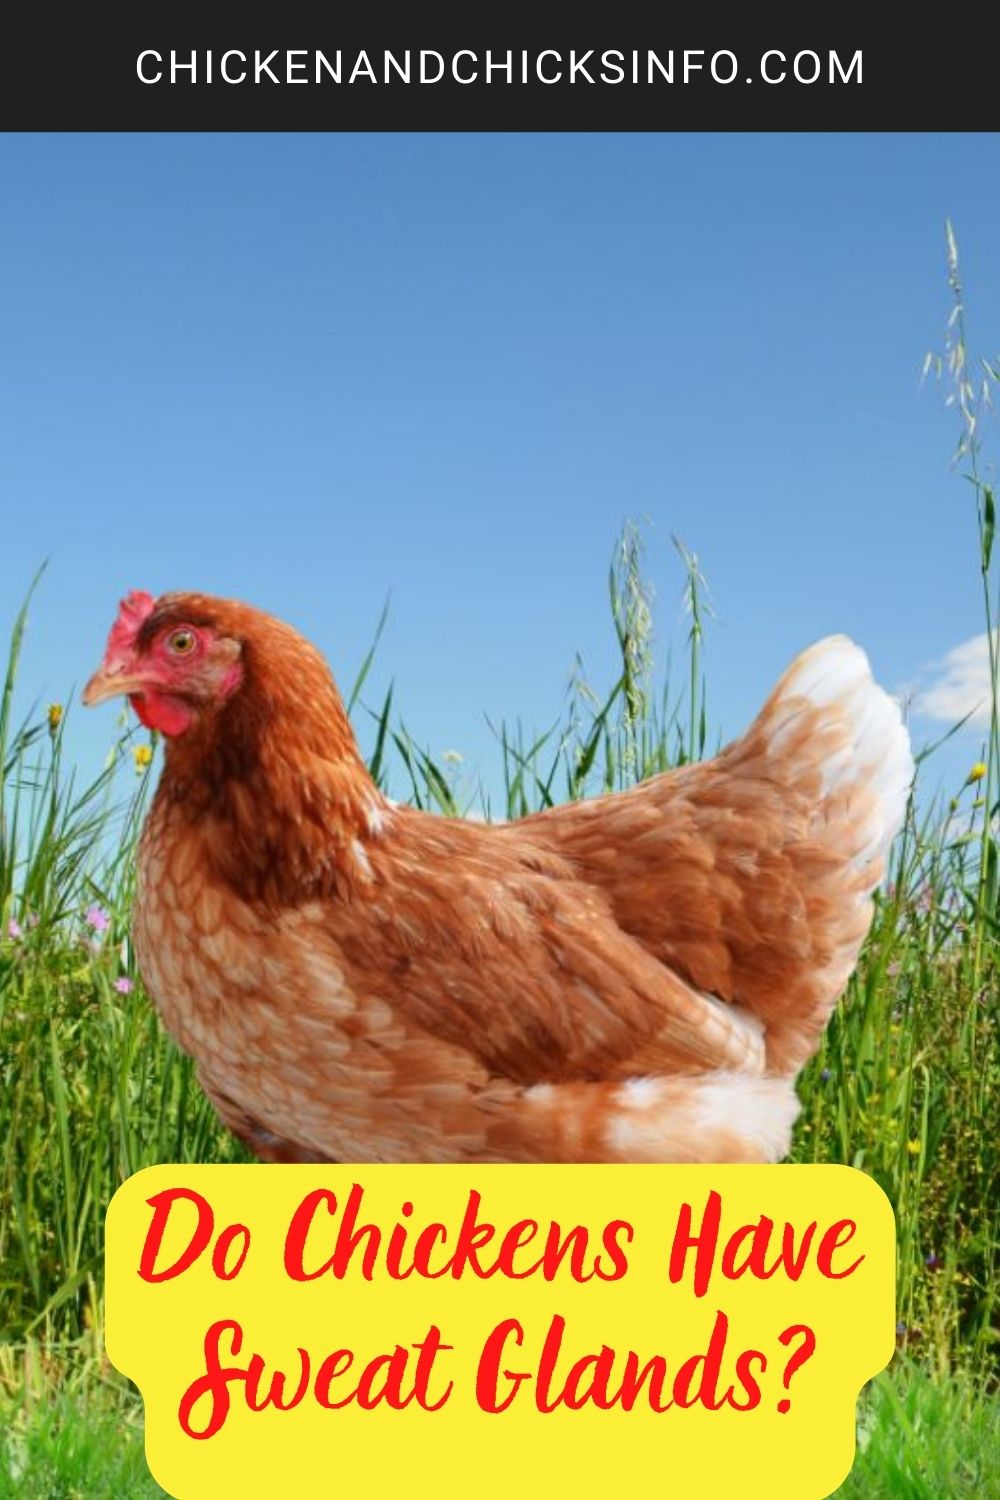 Do Chickens Have Sweat Glands? poster.
